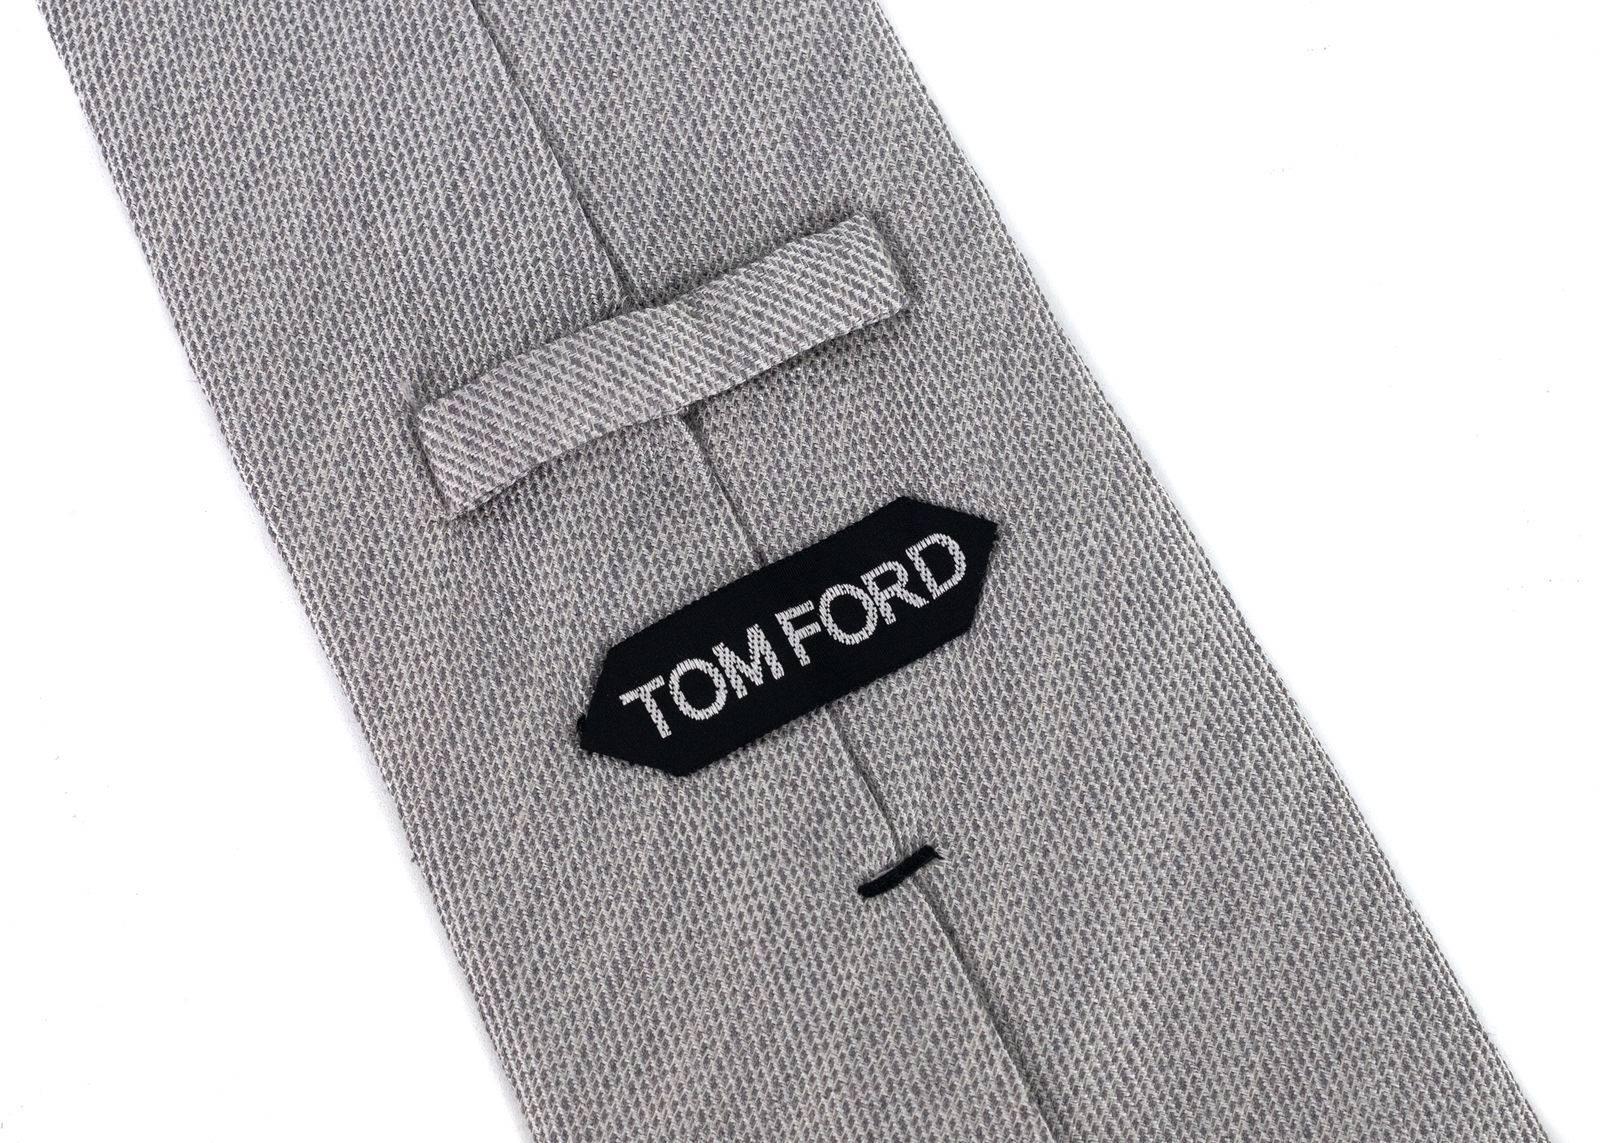 alian luxury brand, Tom Ford, has crafted these gorgeous Woven and Silk Blend Tie for important special occasions and professional events. The tie is great to pair with your favorite solid color button down and blazers with your chosen pair or